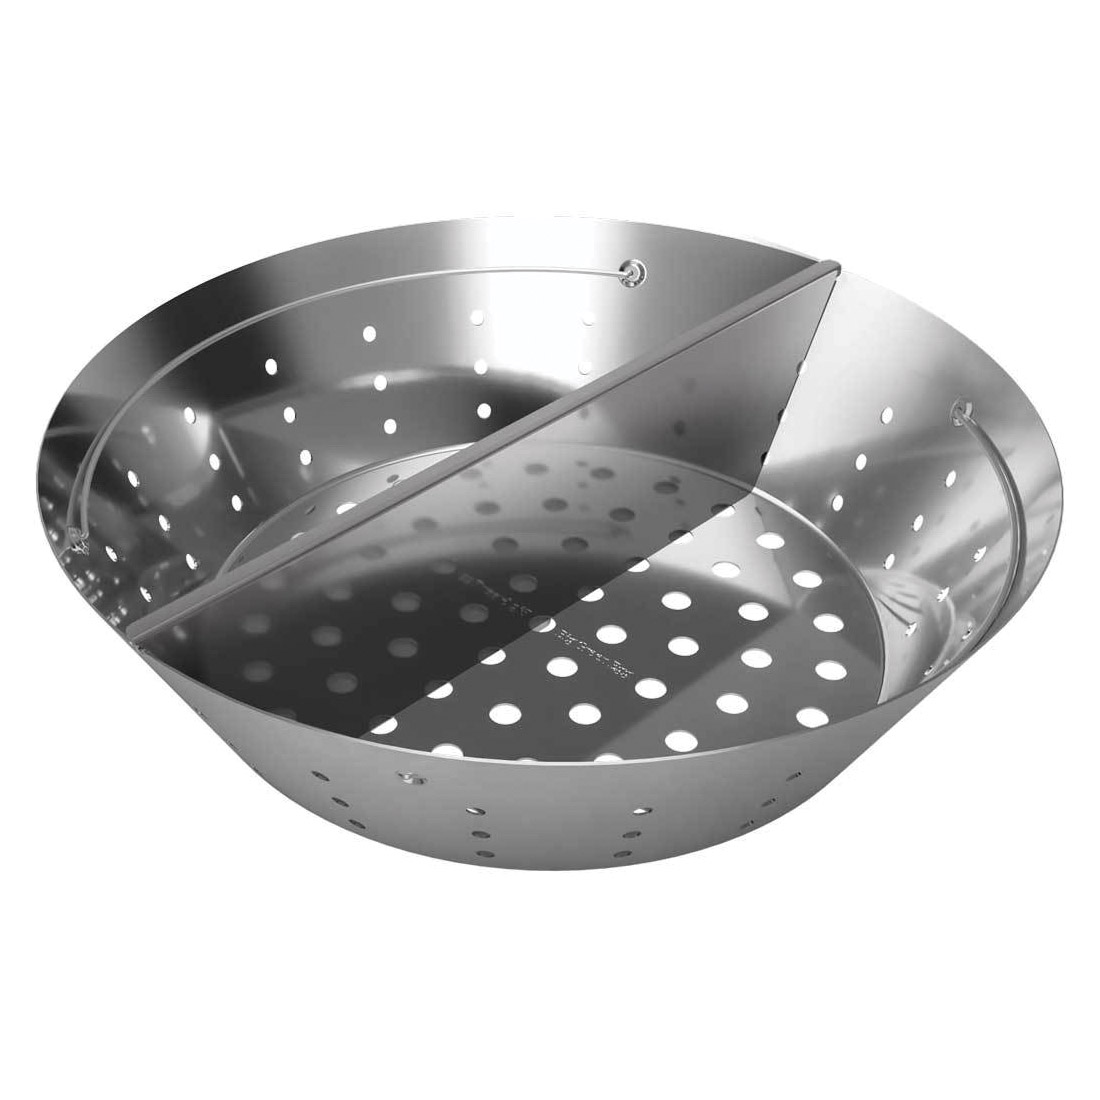 Big Green Egg 122681 Fire Bowl, Stainless Steel, For: XL Egg - 1